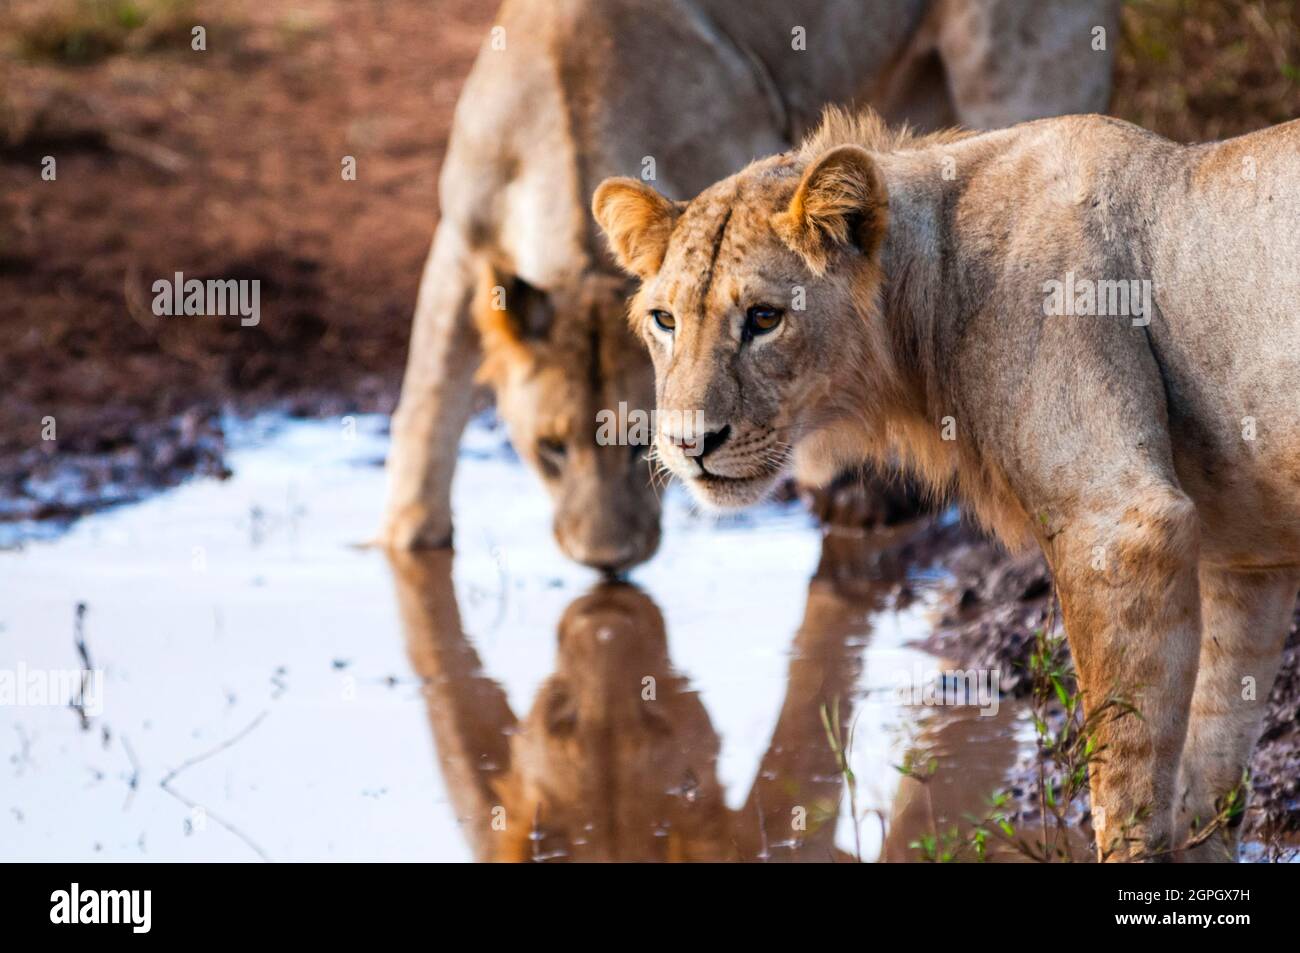 Kenya, Tsavo East National Park, two young male lions (Panthera leo) drinking in a puddle Stock Photo